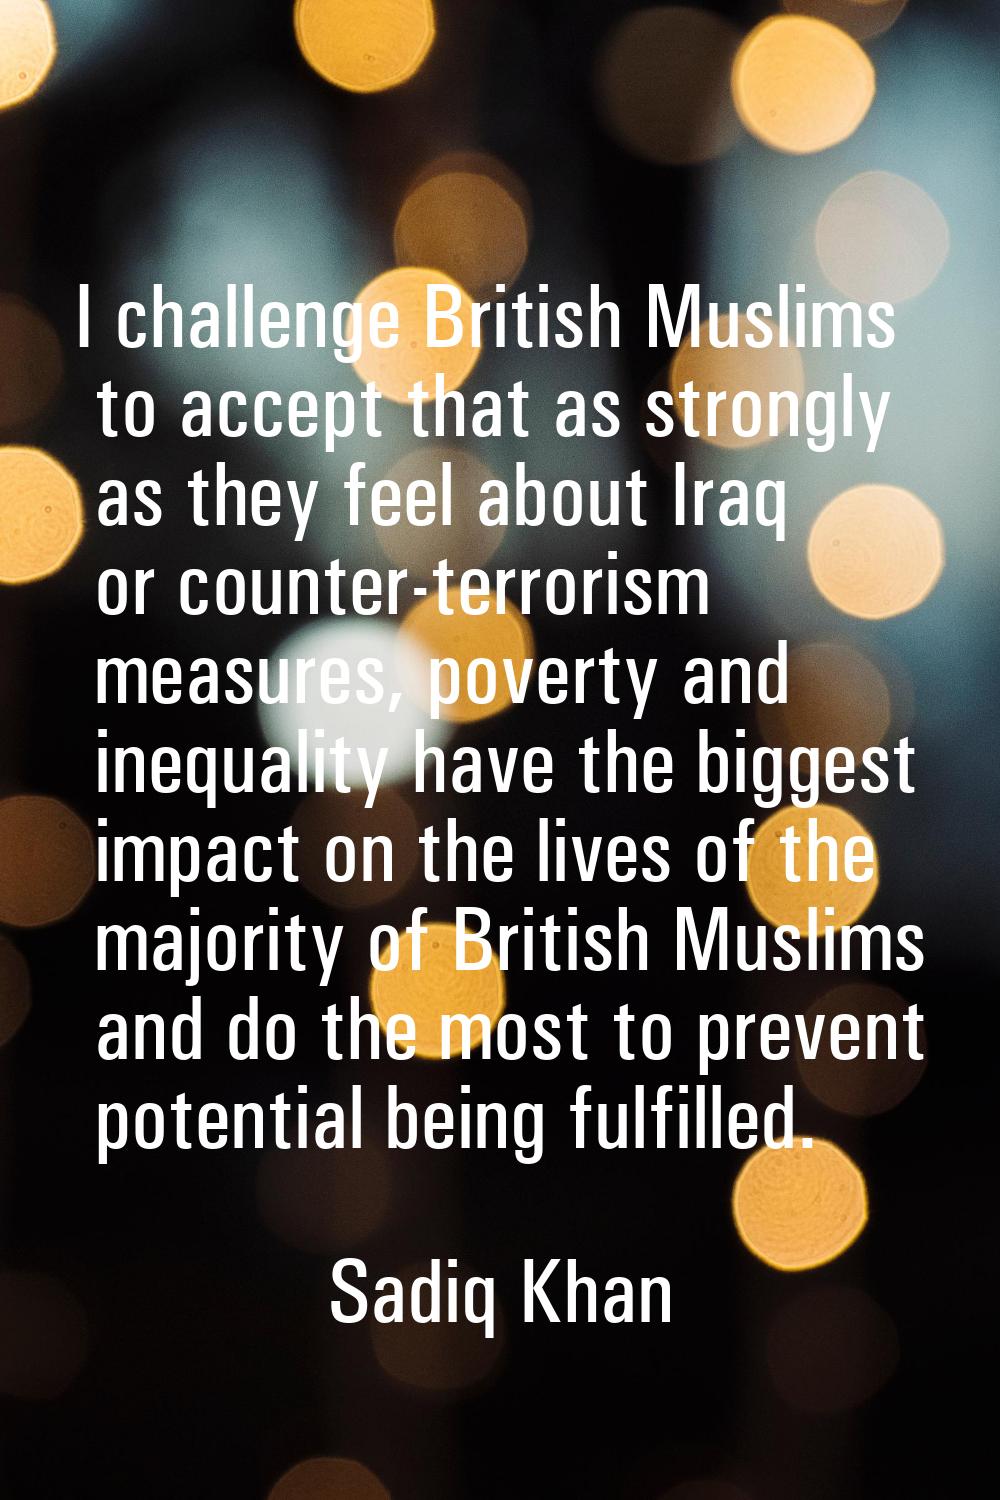 I challenge British Muslims to accept that as strongly as they feel about Iraq or counter-terrorism